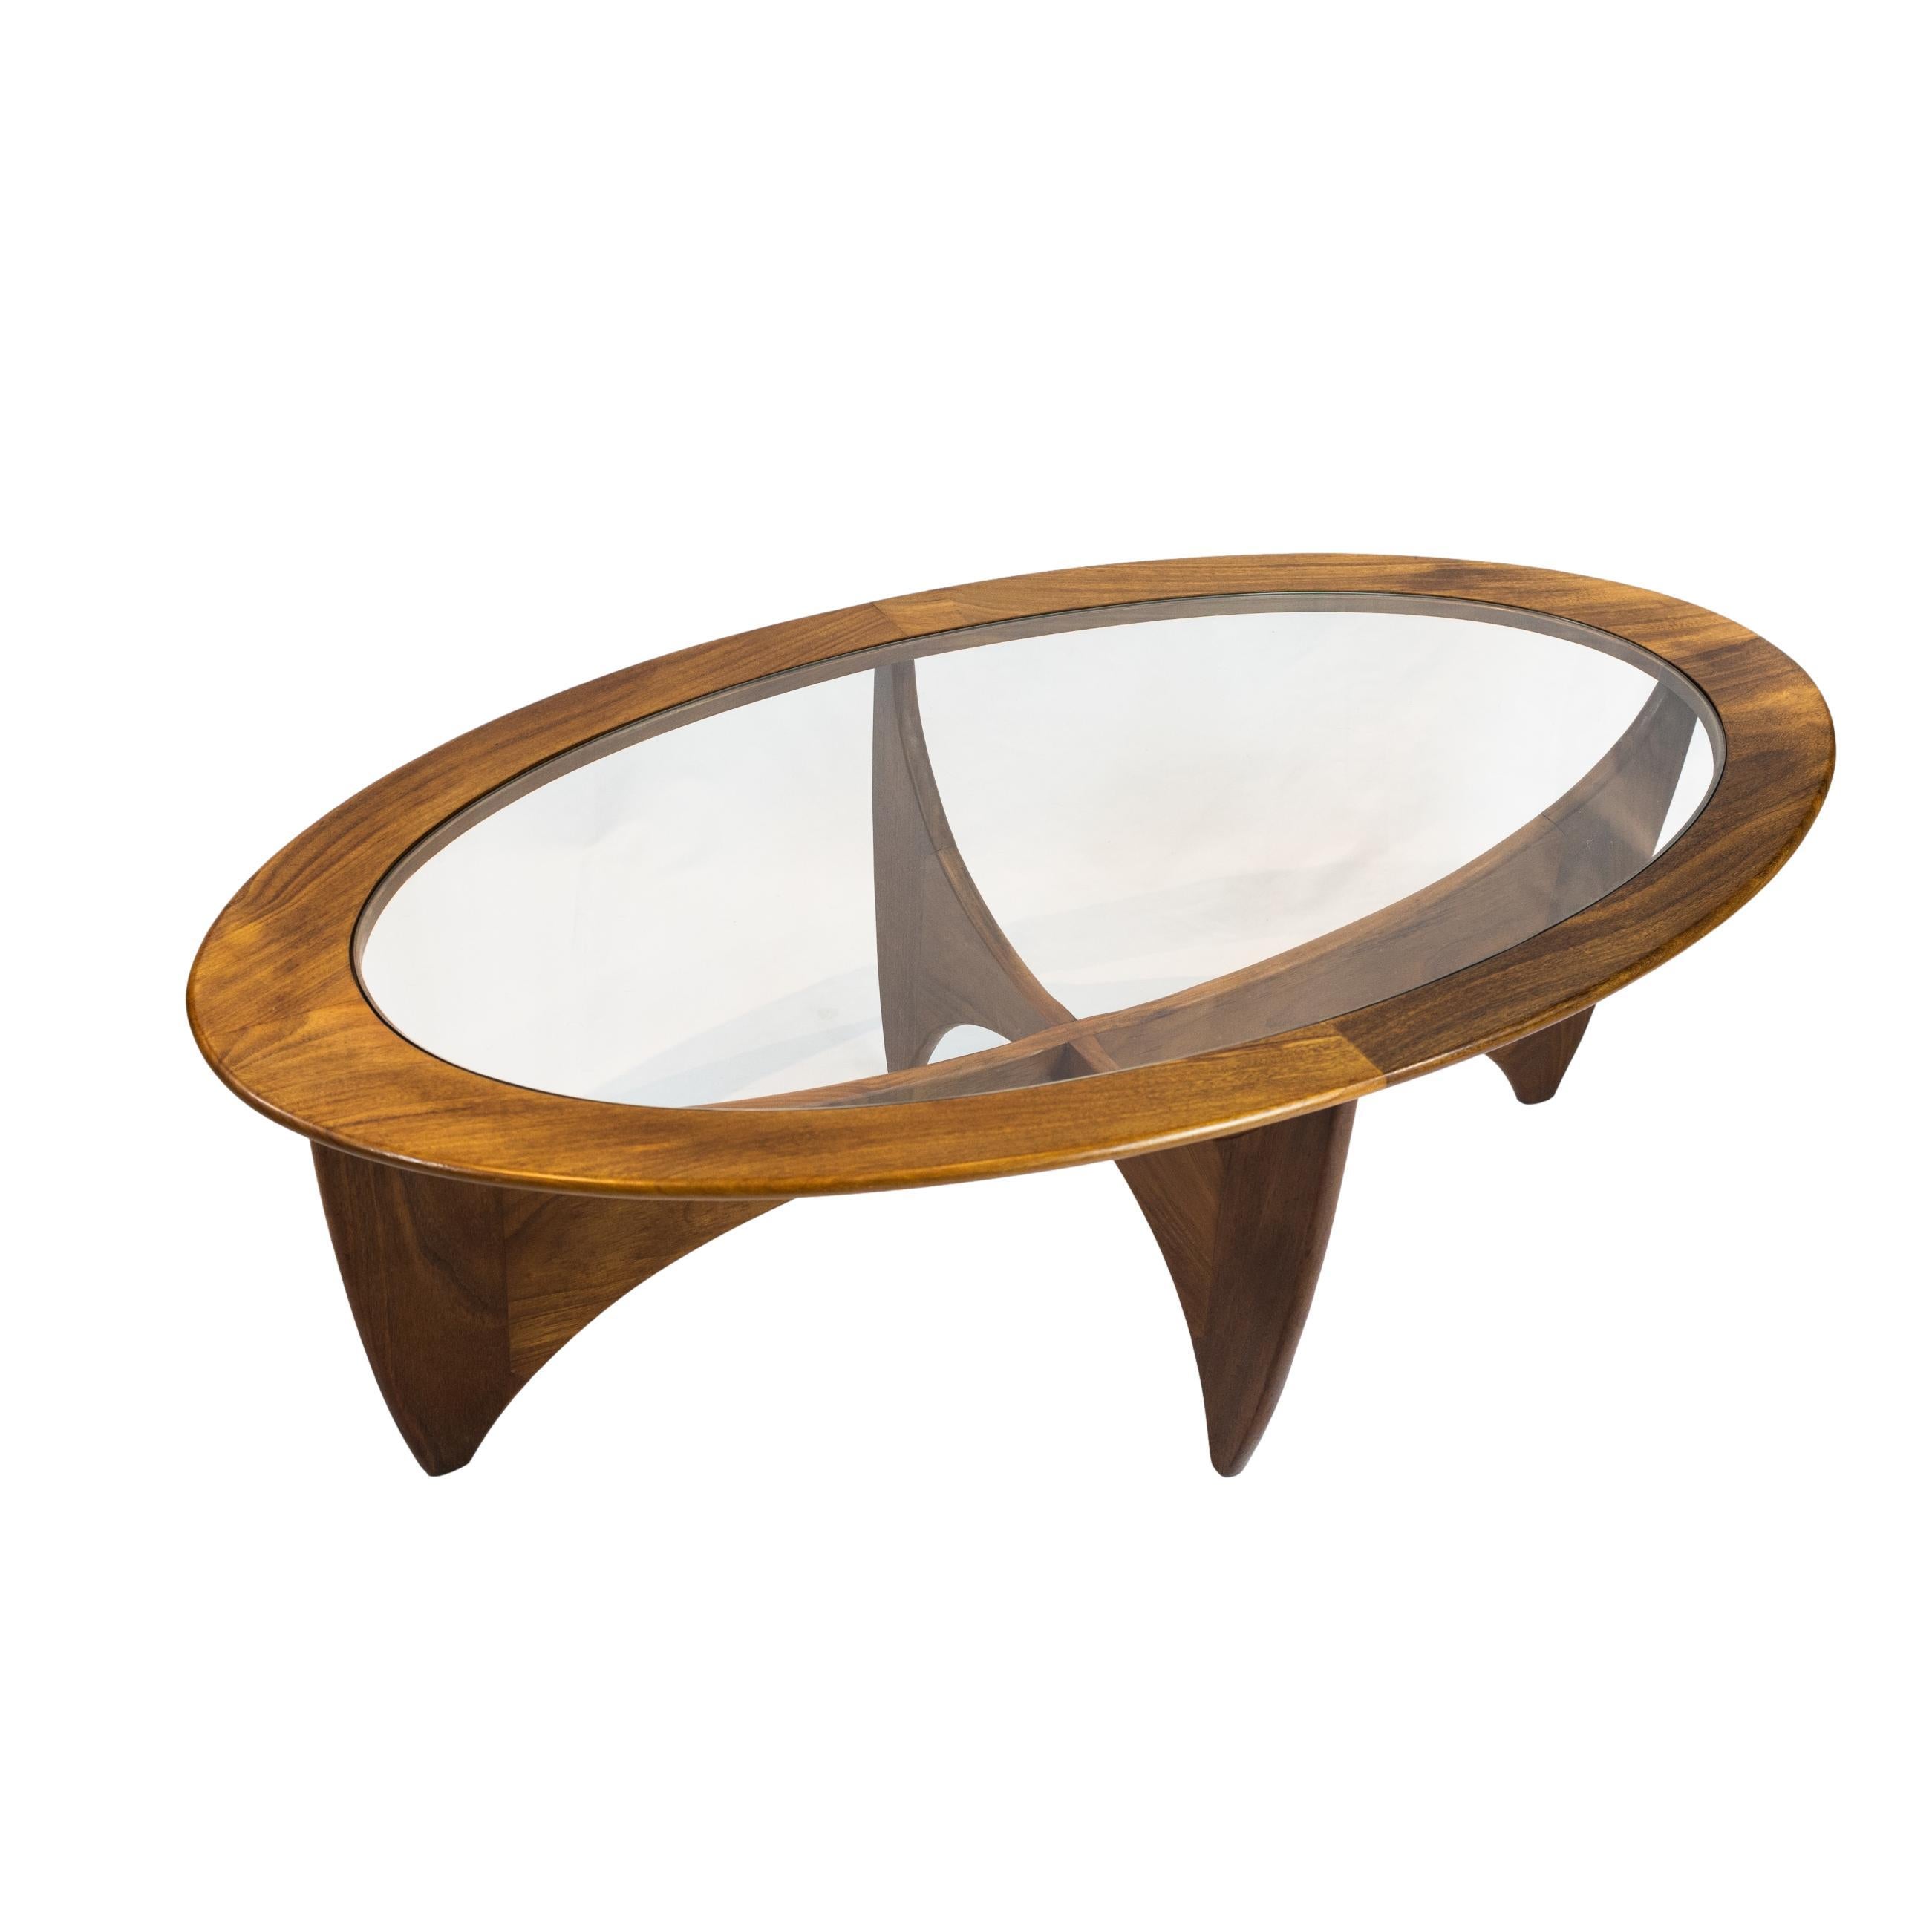 G Plan 'Astro' coffee table
This iconic table, designed by Victor Wilkins for G Plan in 1960, is an emblem of the time, the world’s entry into the Space Age. 
Constructed in Afromasia teak; with glass insert. 
When the years of rationing in